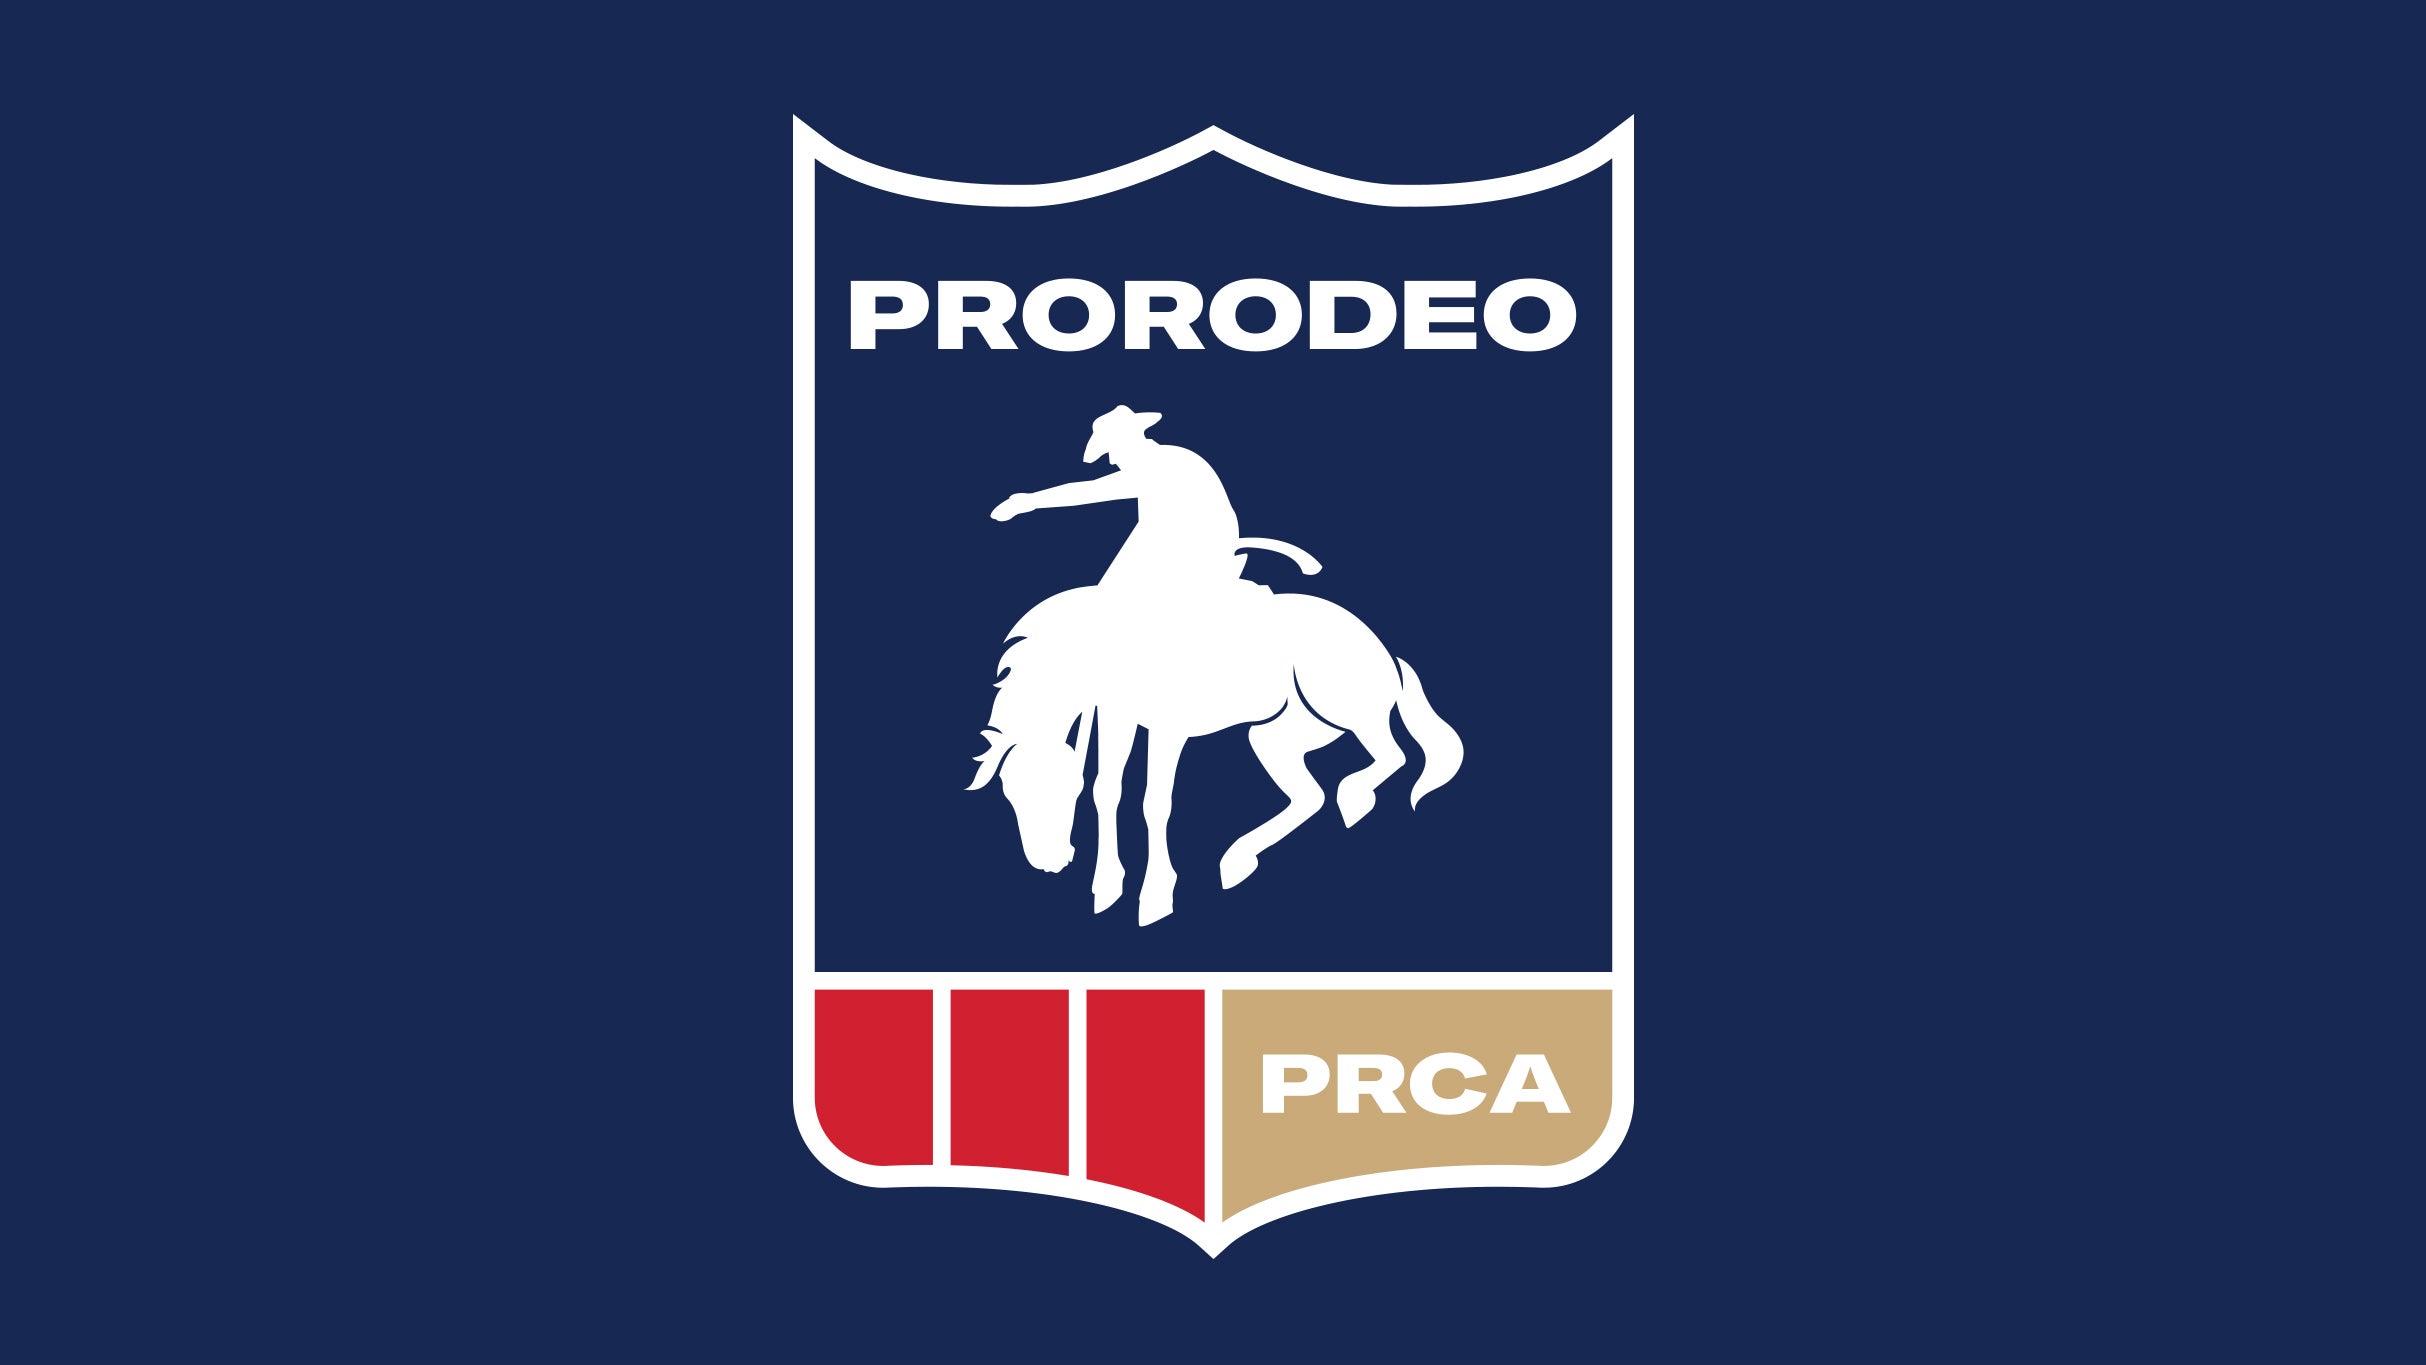 PRCA Rodeo at Cheyenne Frontier Days